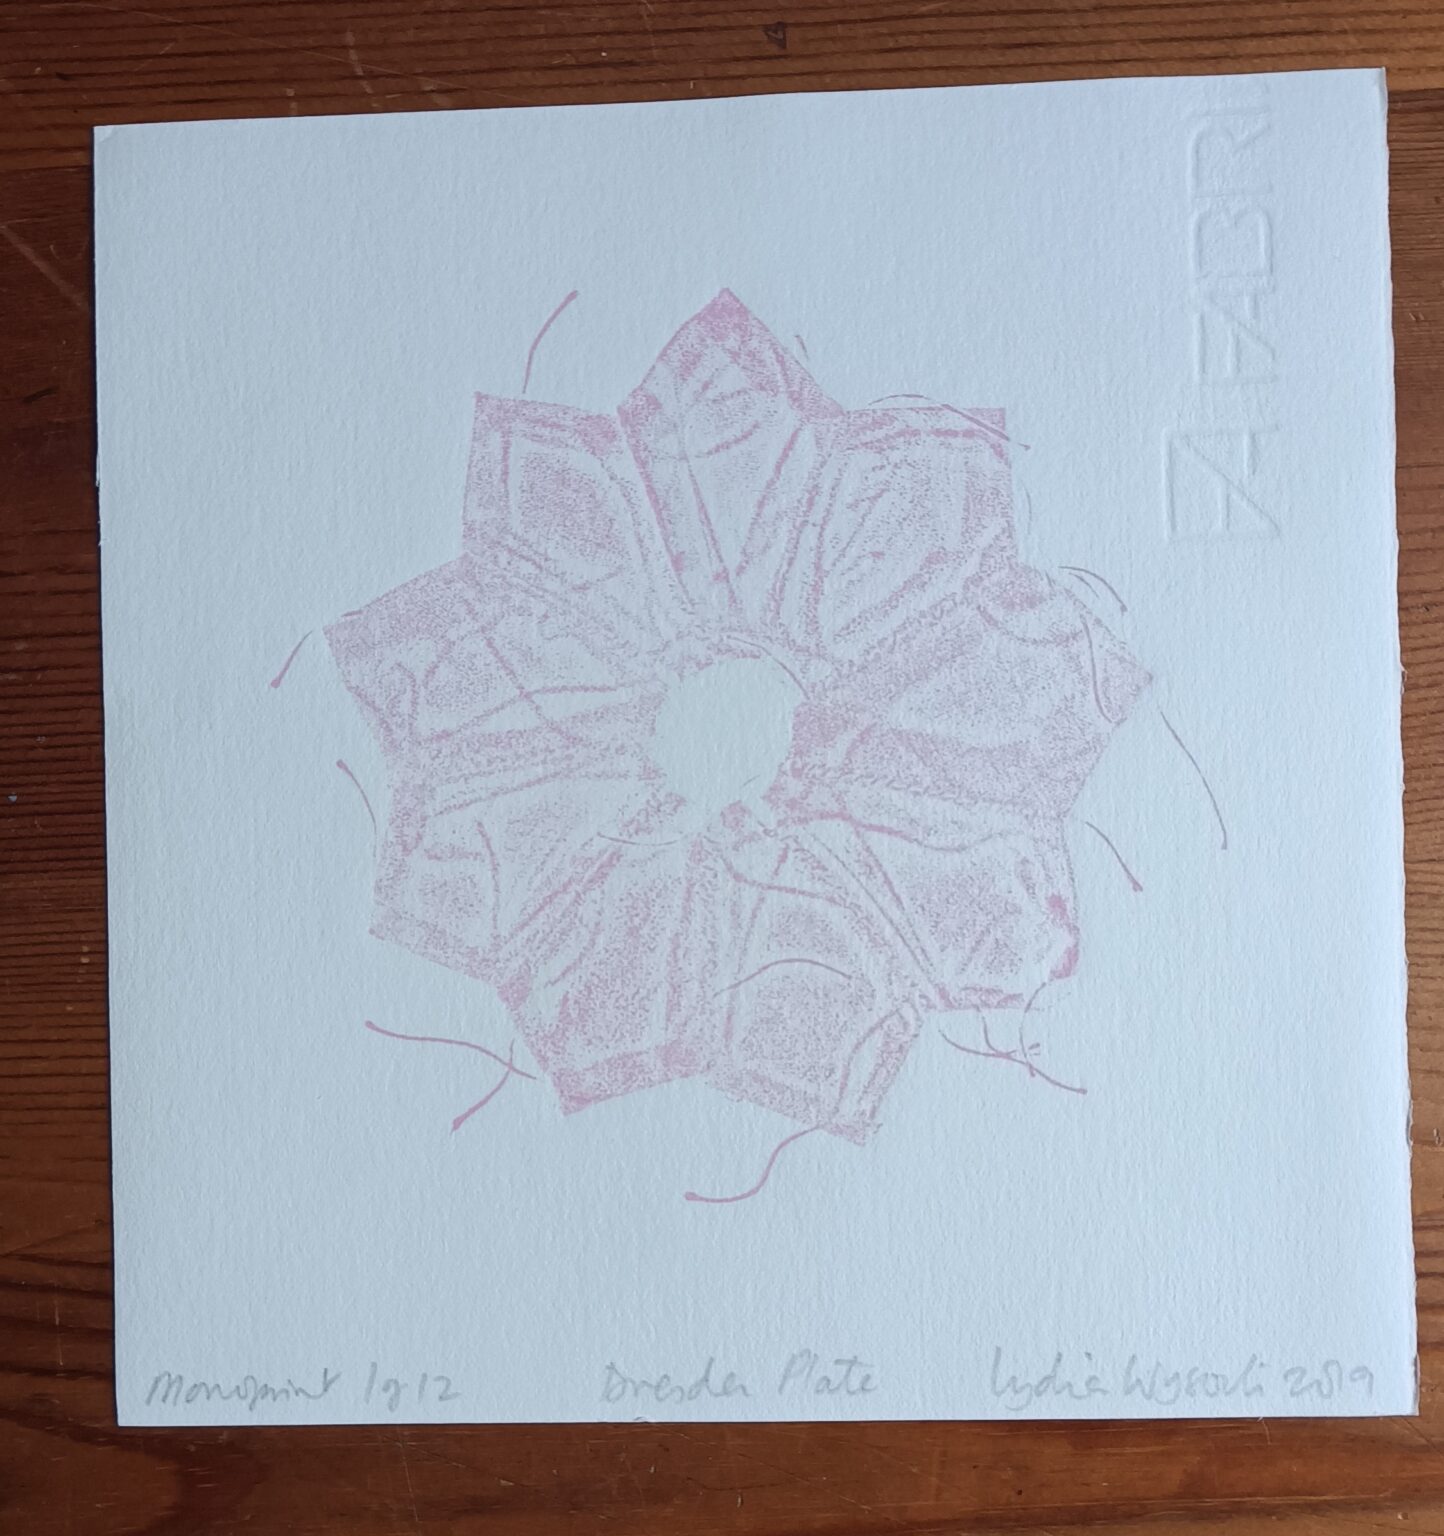 photo of Dresden Plate monoprint from patchwork - pink flower with pointed petals